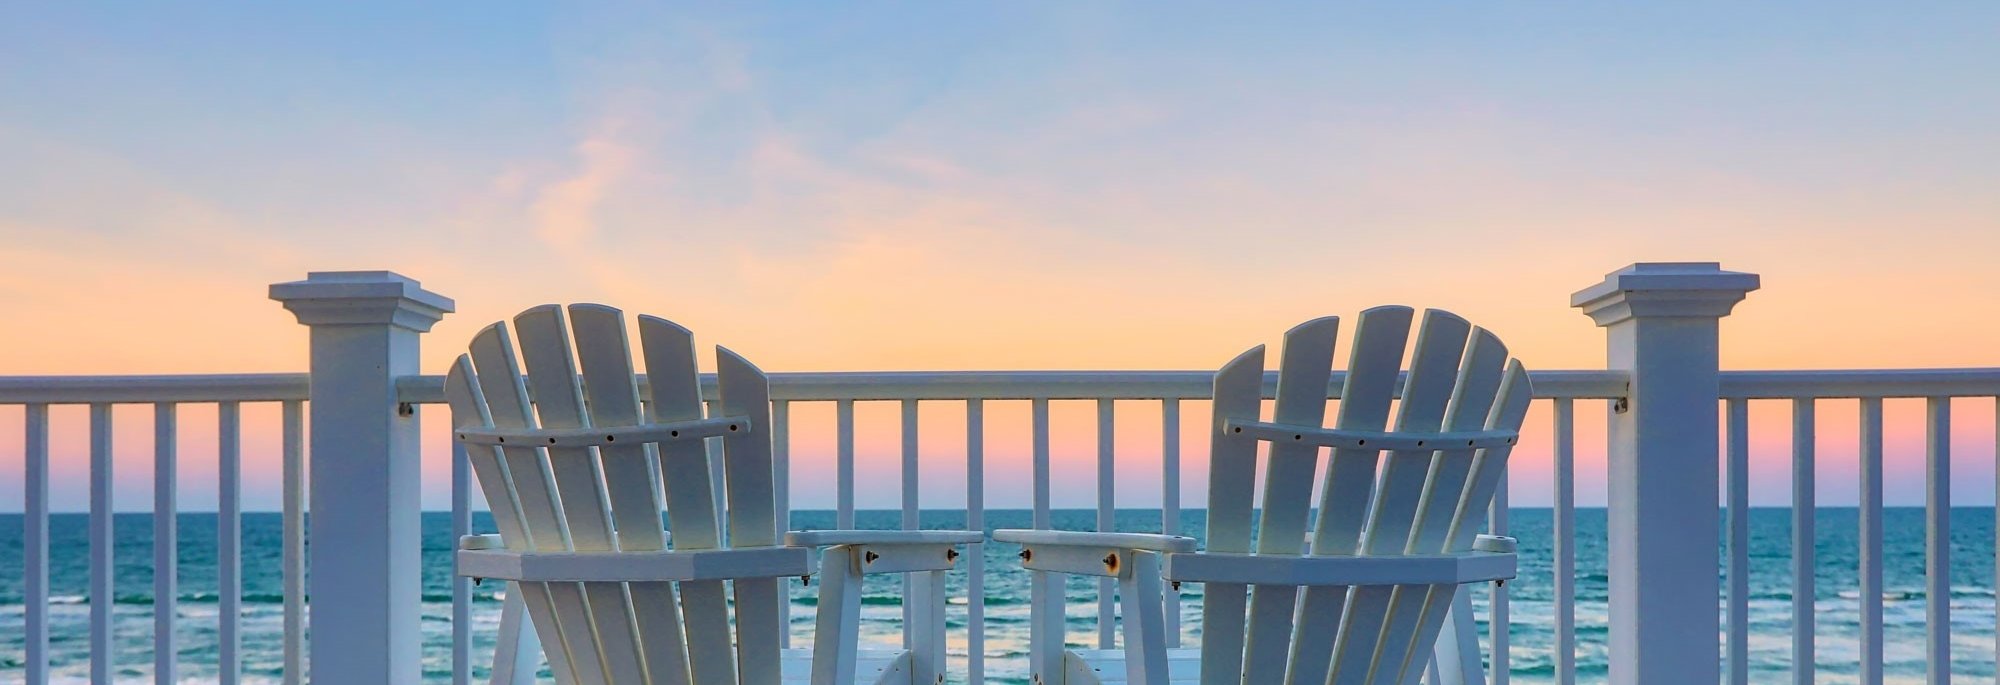 view of calm beach at sunset from behind Adirondack chairs and deck rails 